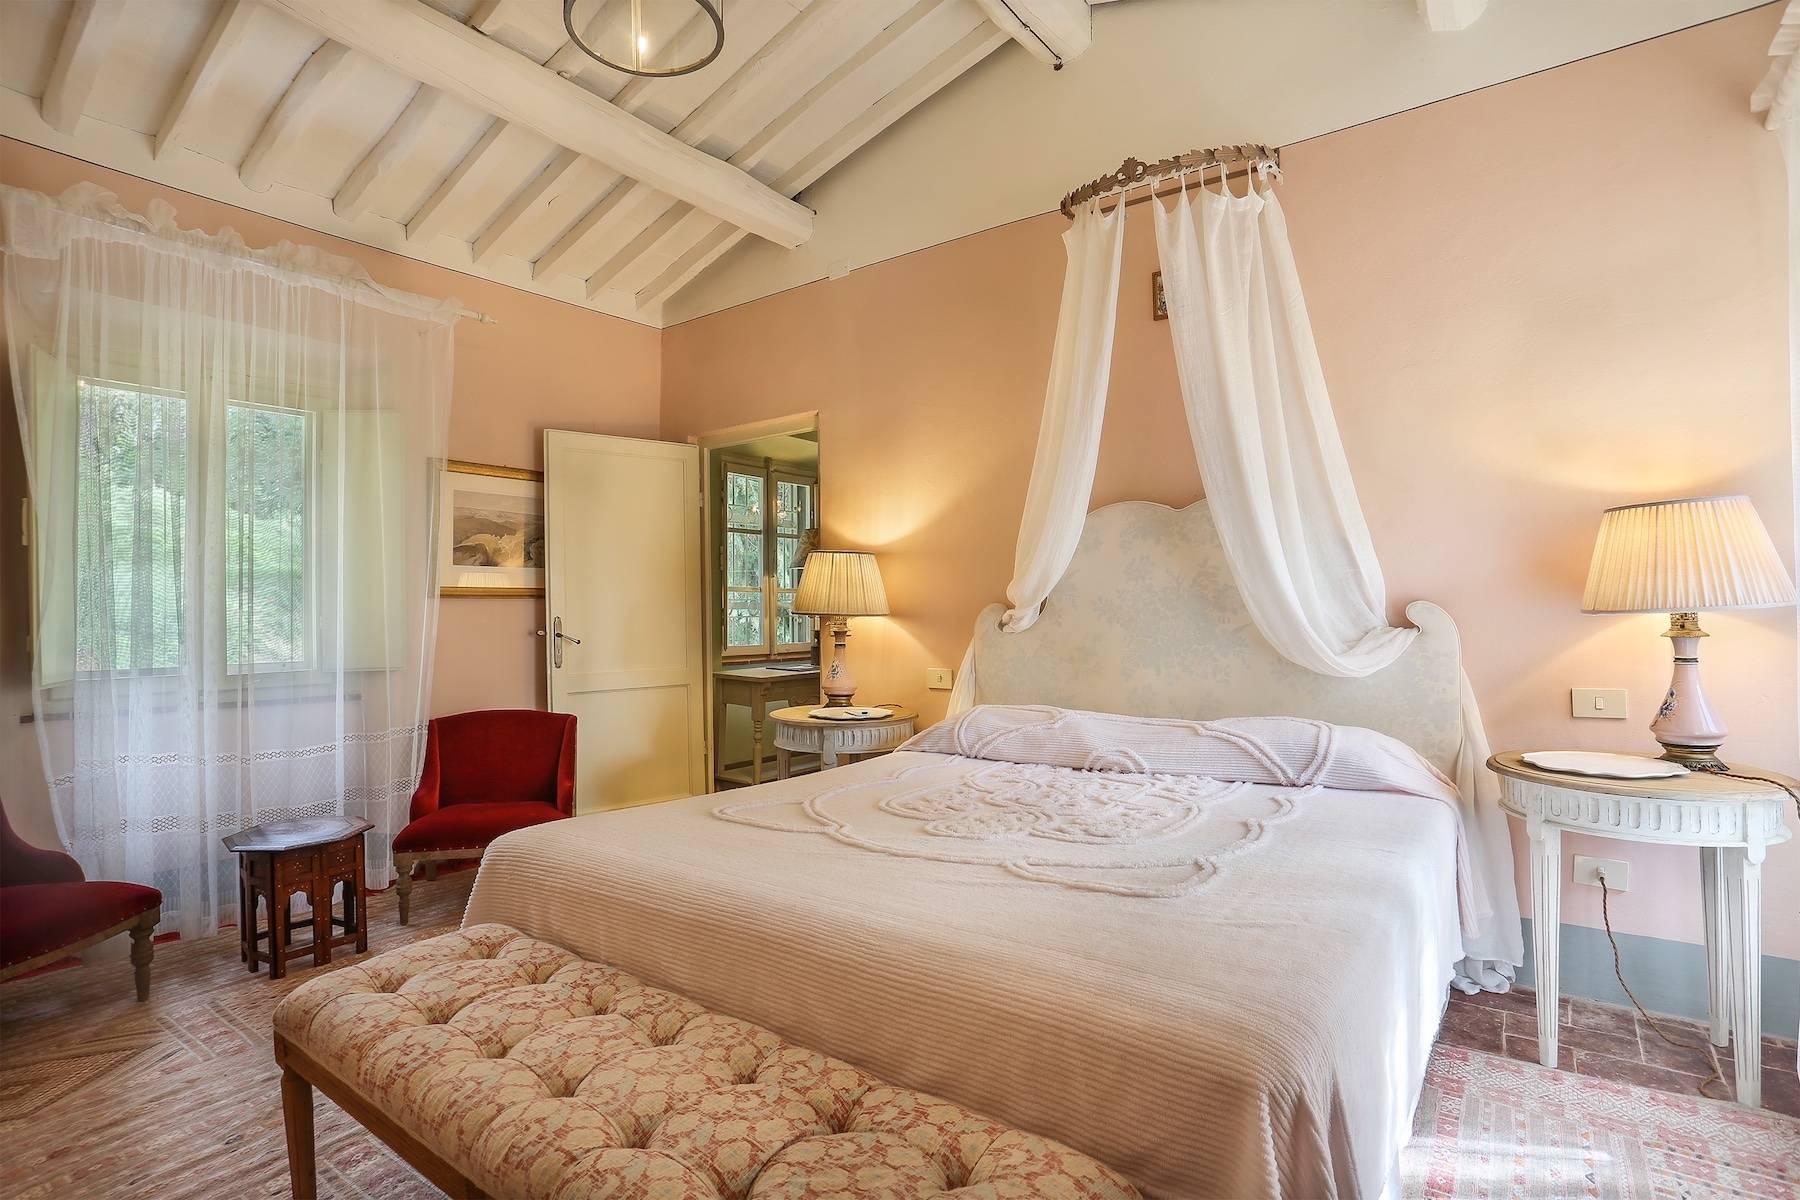 A majestic villa situated between Lucca and Camaiore - 10